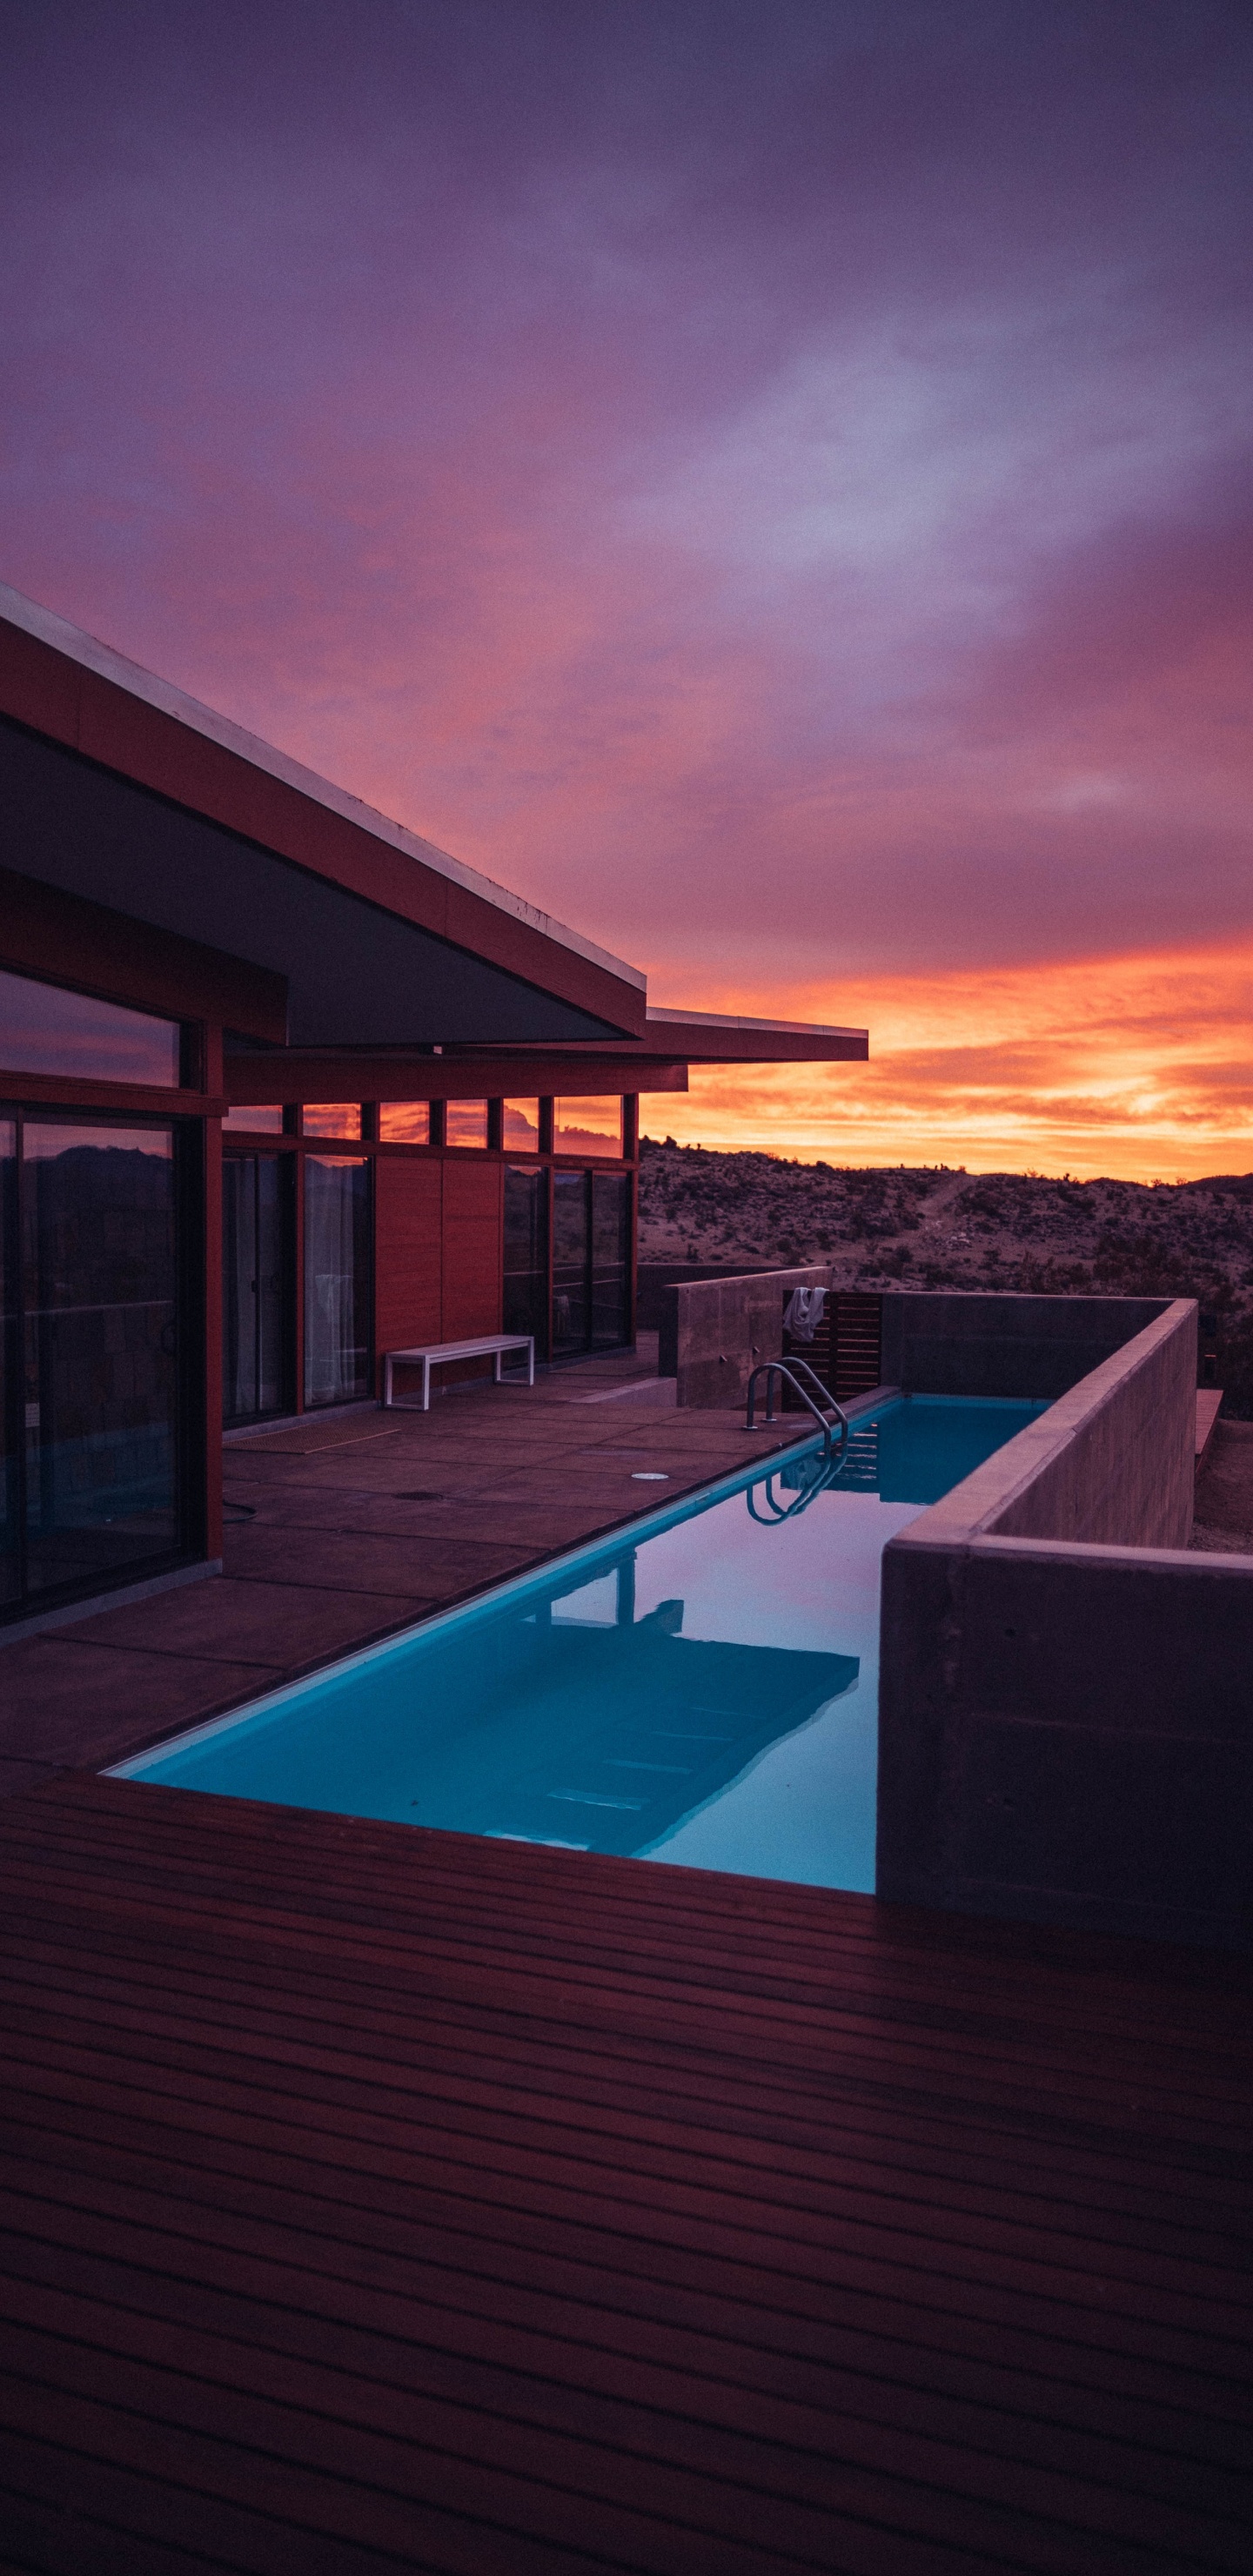 Swimming Pool Near Brown Wooden House During Sunset. Wallpaper in 1440x2960 Resolution